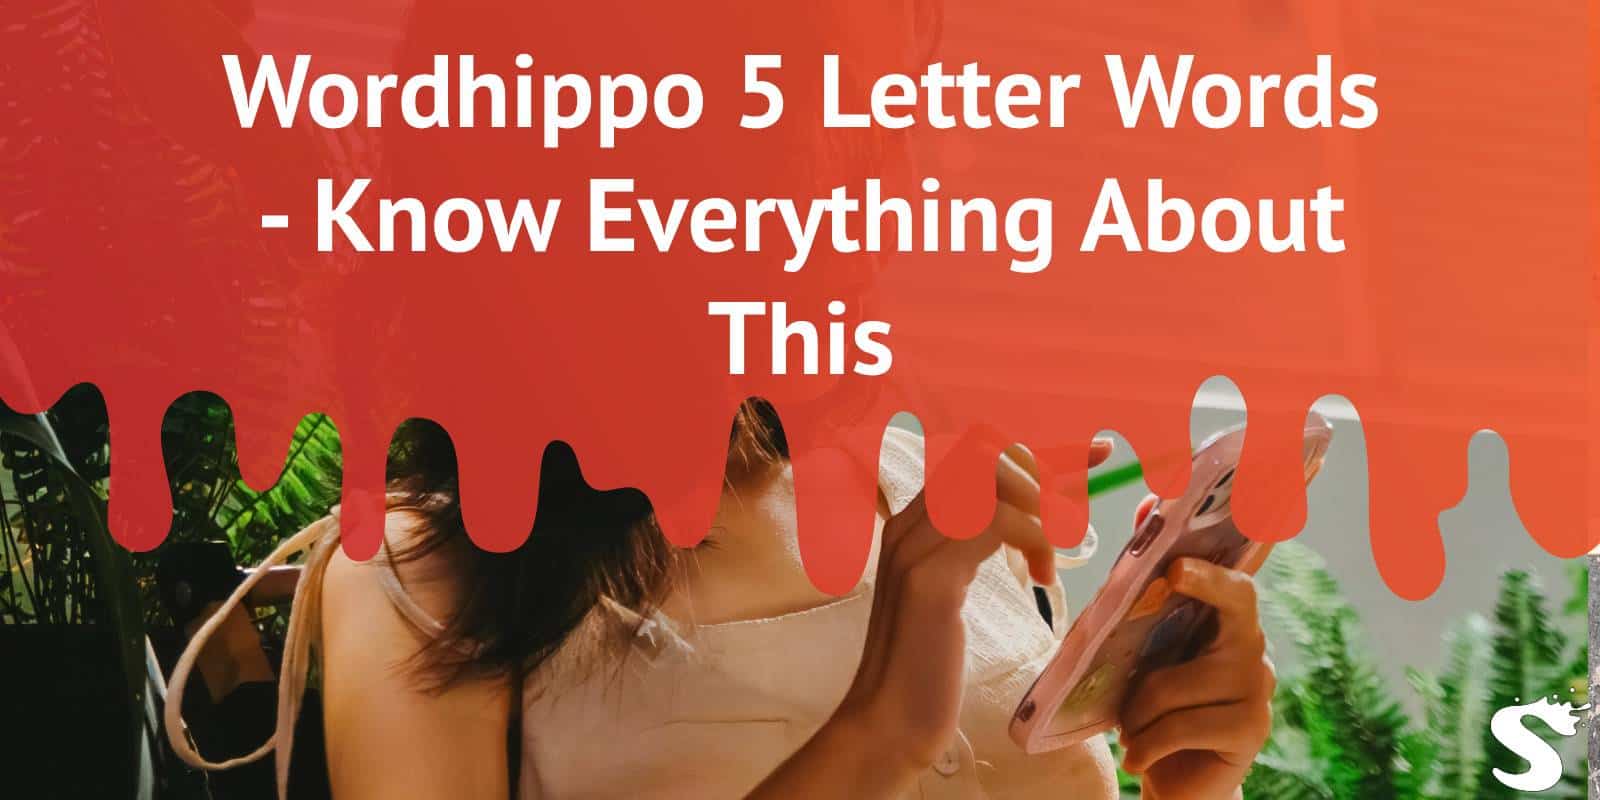 Wordhippo 5 Letter Words - Know Everything About This